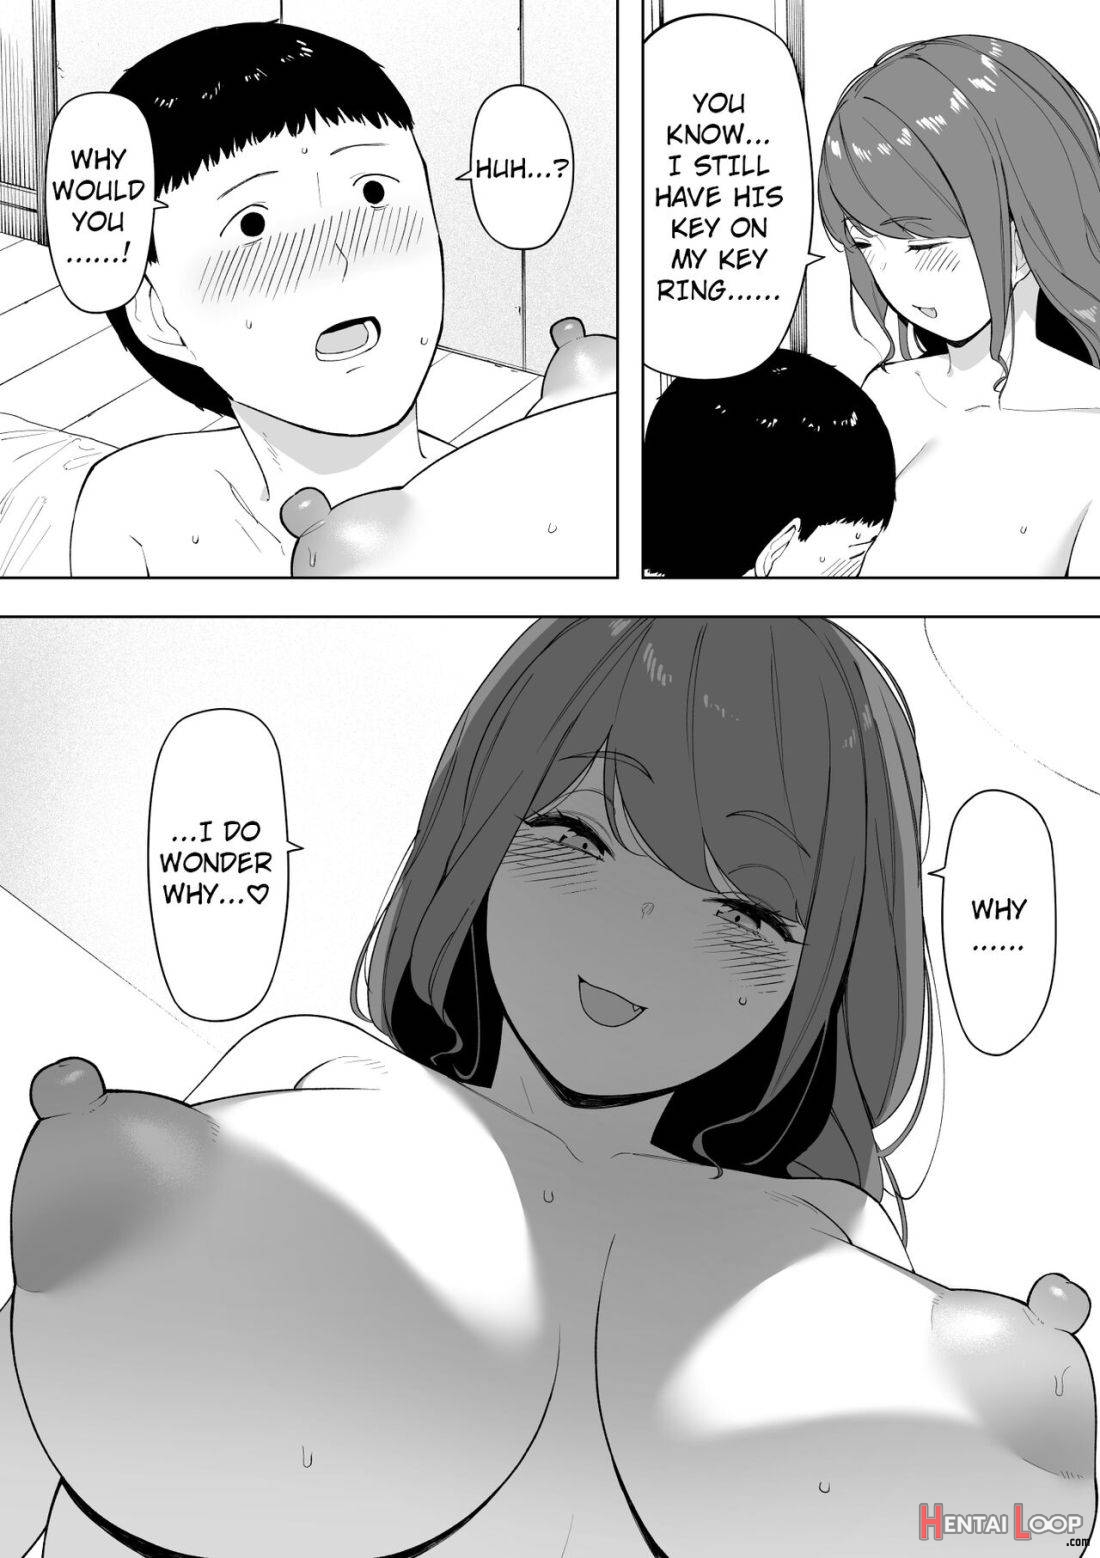 My Devoted Wife, with Permission, Engages in Cuckolding Vol.6 -My Wife Kurumi has Slept with Over 90 Men page 10